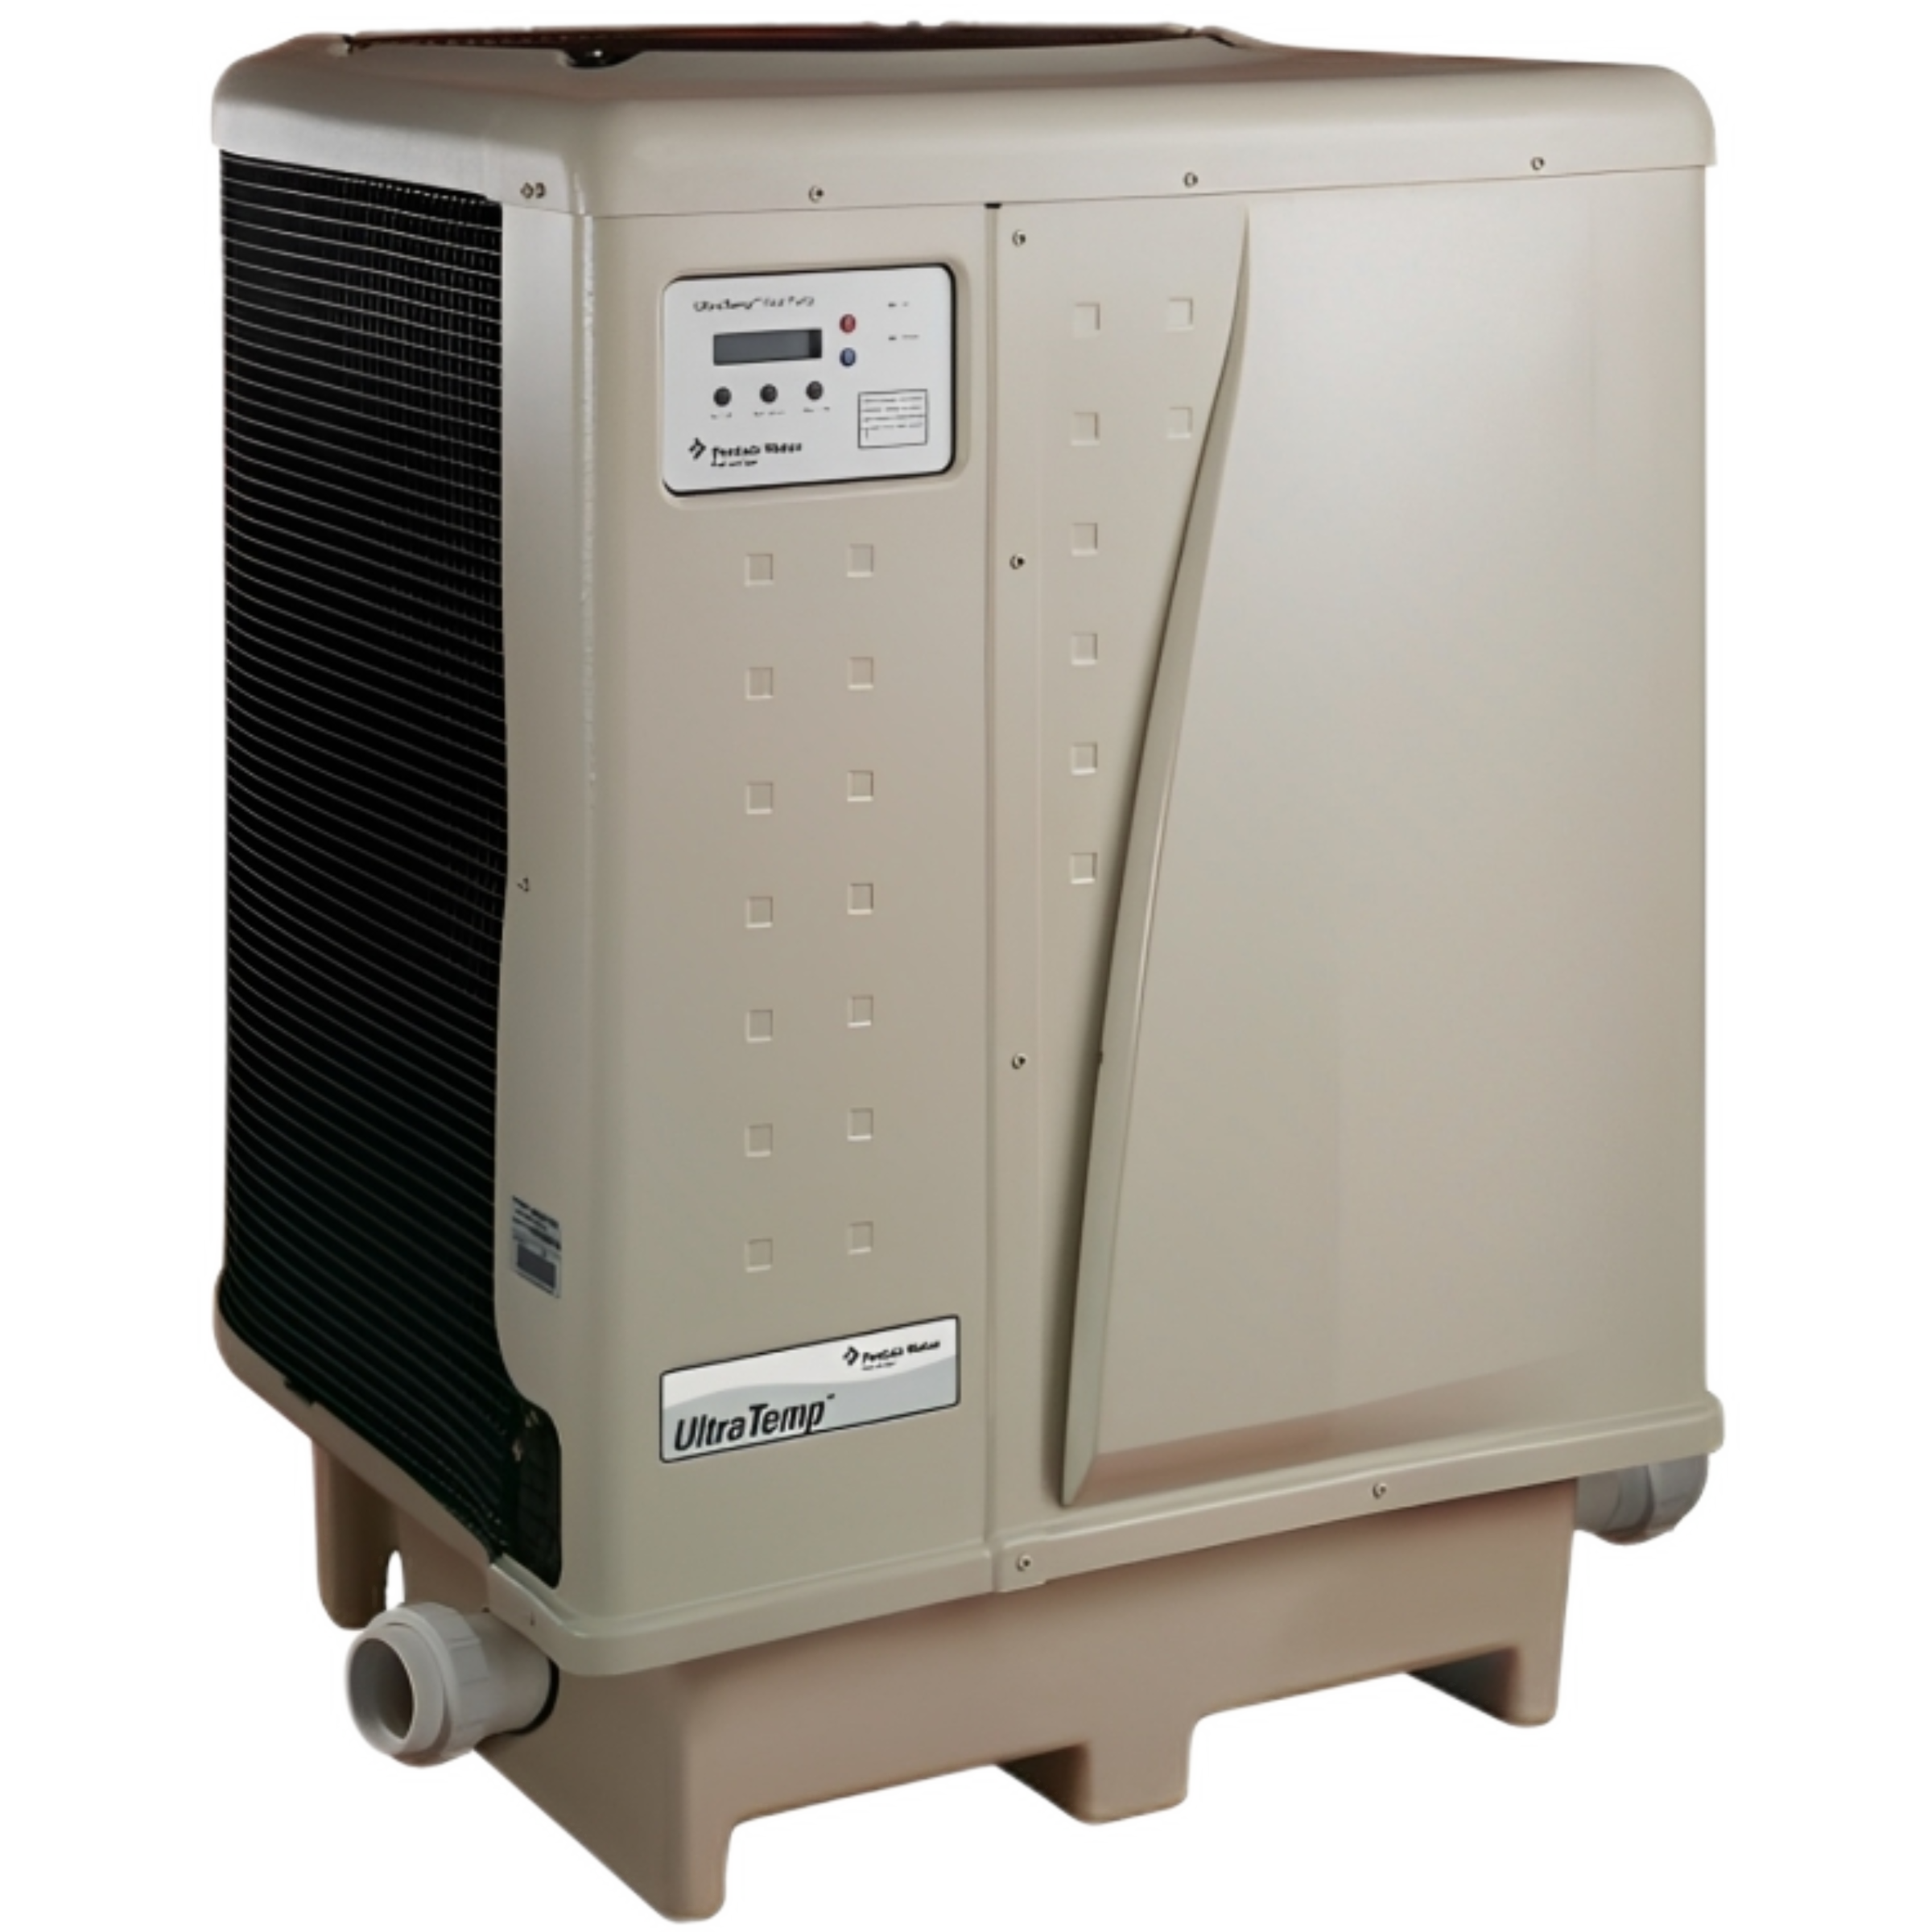 460930 PENTAIR UltraTemp 70 High Performance Pool Heat Pump, Color: Almond, 
SIMPLY THE MOST ECONOMICAL WAY TO HEAT POOLS AND SPAS